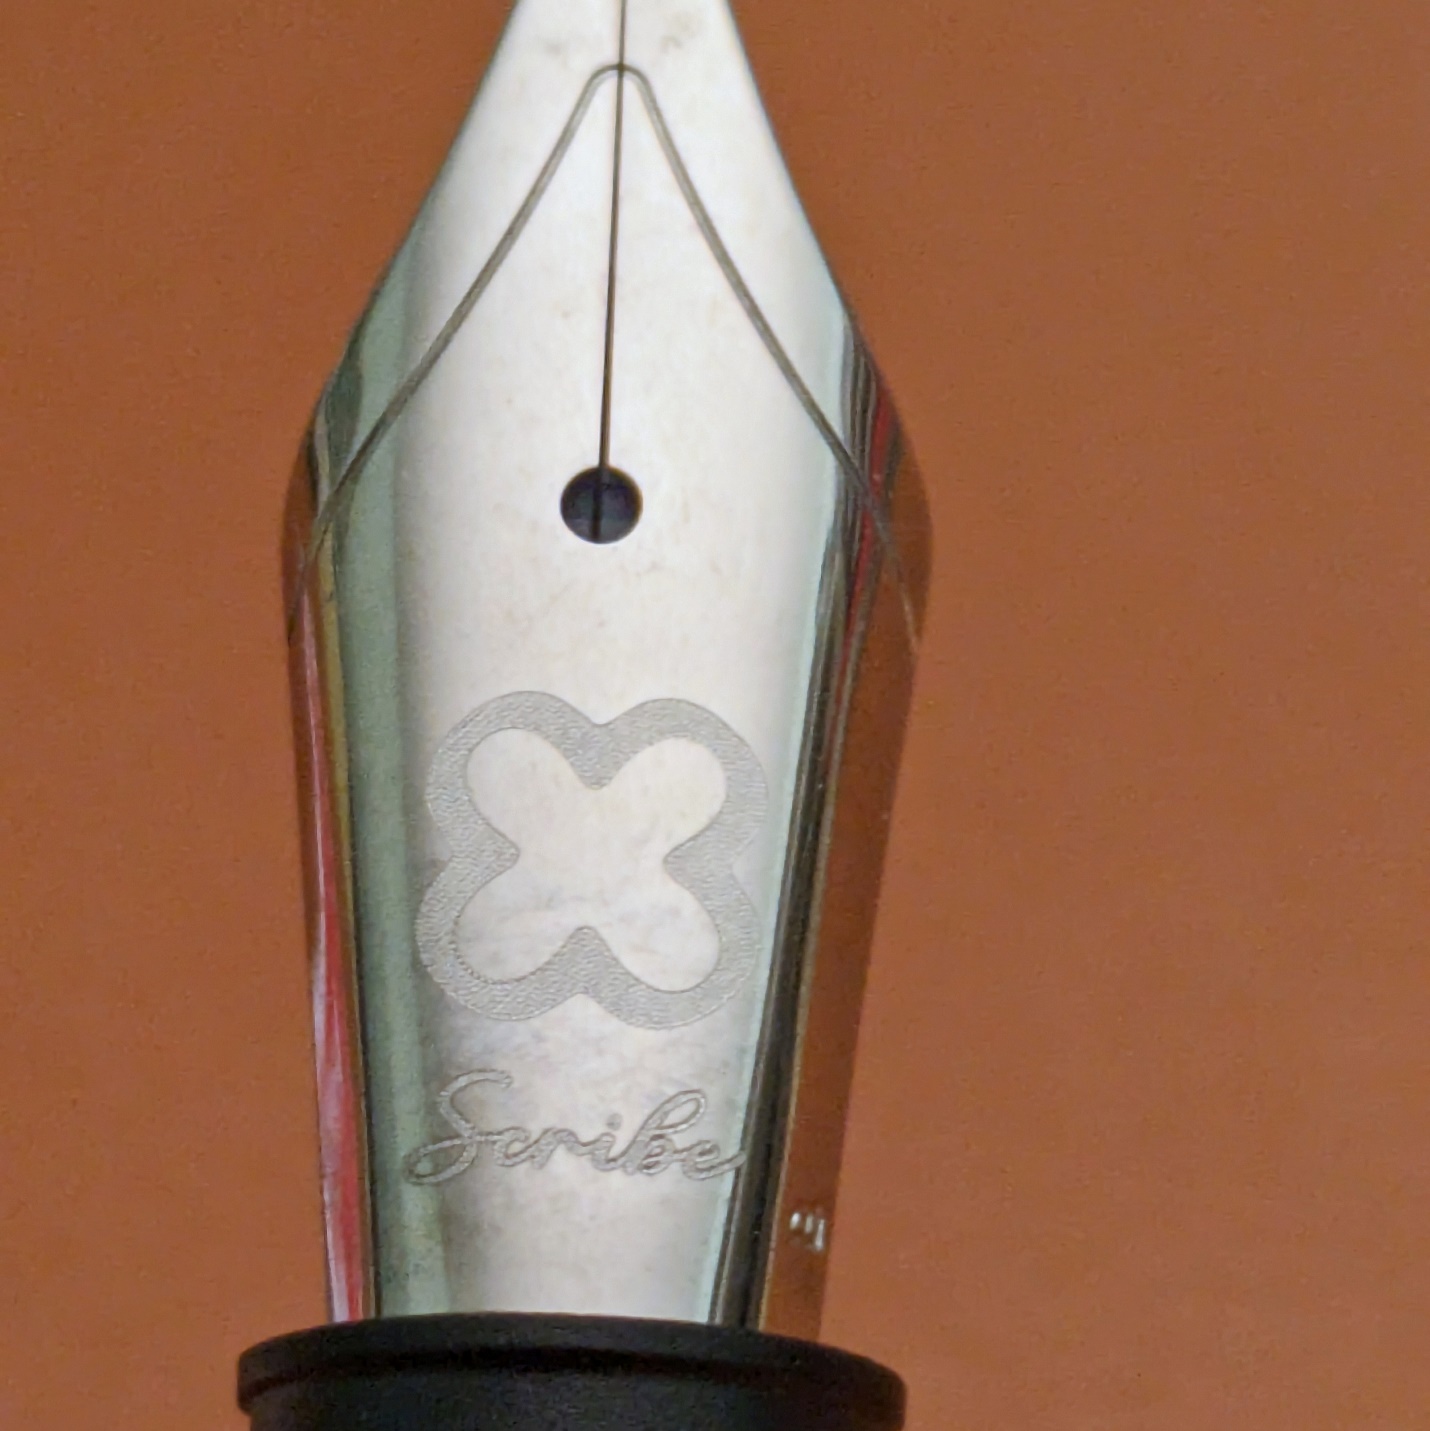 I'm ambivalent on the Esterbrook "infinity" symbol because it just looks like a rounded off X to me. But I do like the Scribe marking and lack of scrollwork on this nib. Overall, I think it looks nice and clean.